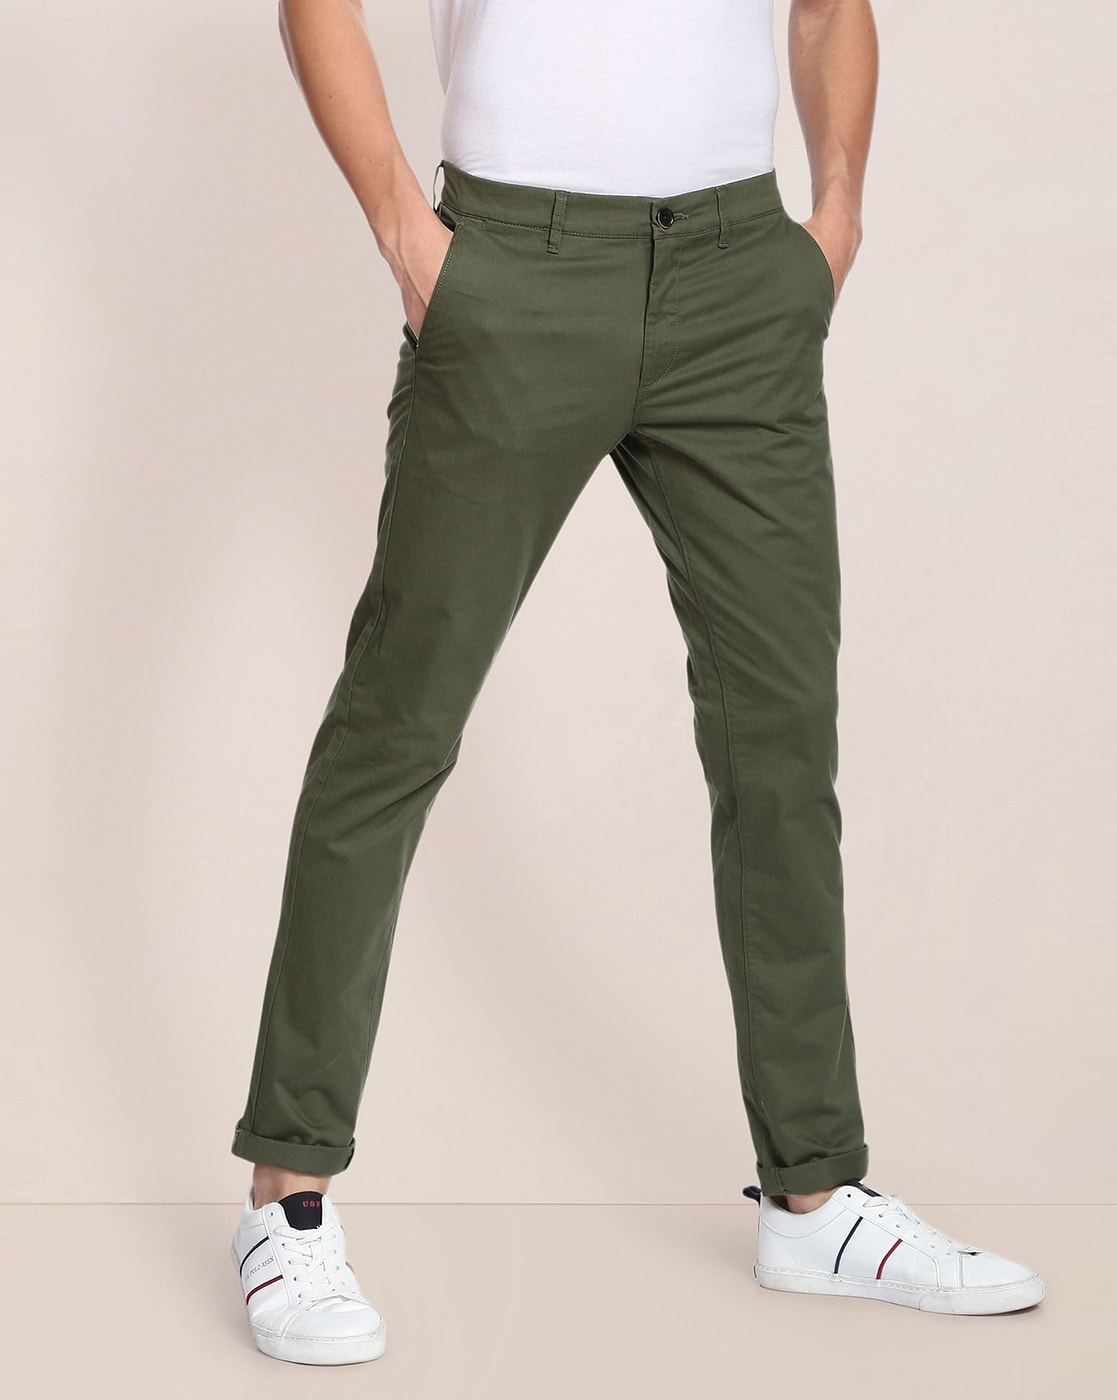 Buy Olive Green Trousers  Pants for Men by LEVIS Online  Ajiocom